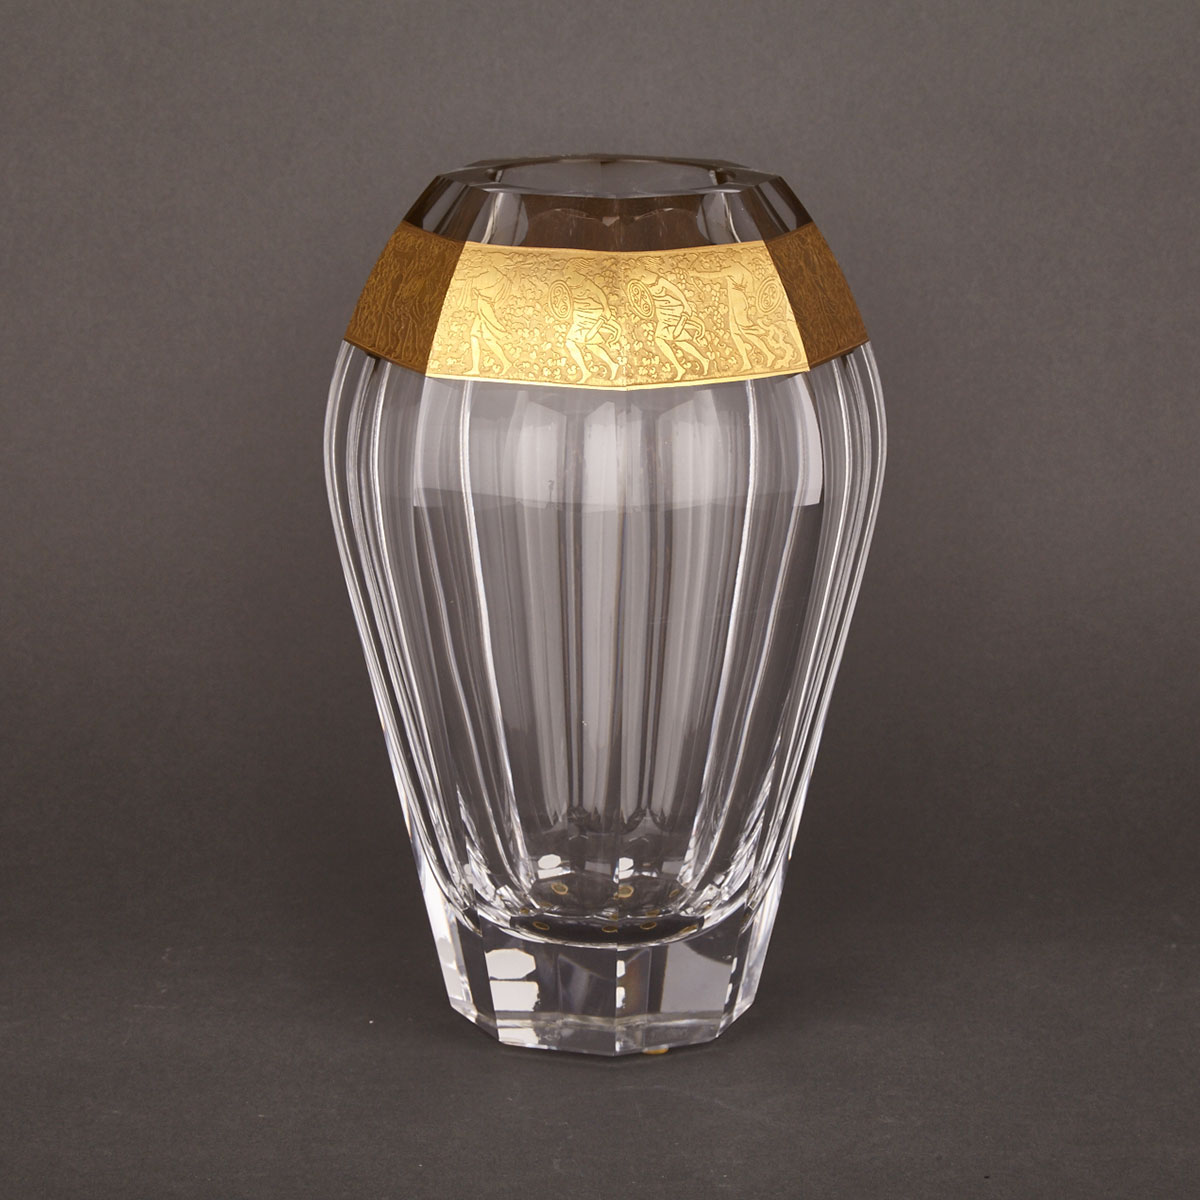 Moser Etched and Gilt Decorated Glass Vase, 20th century